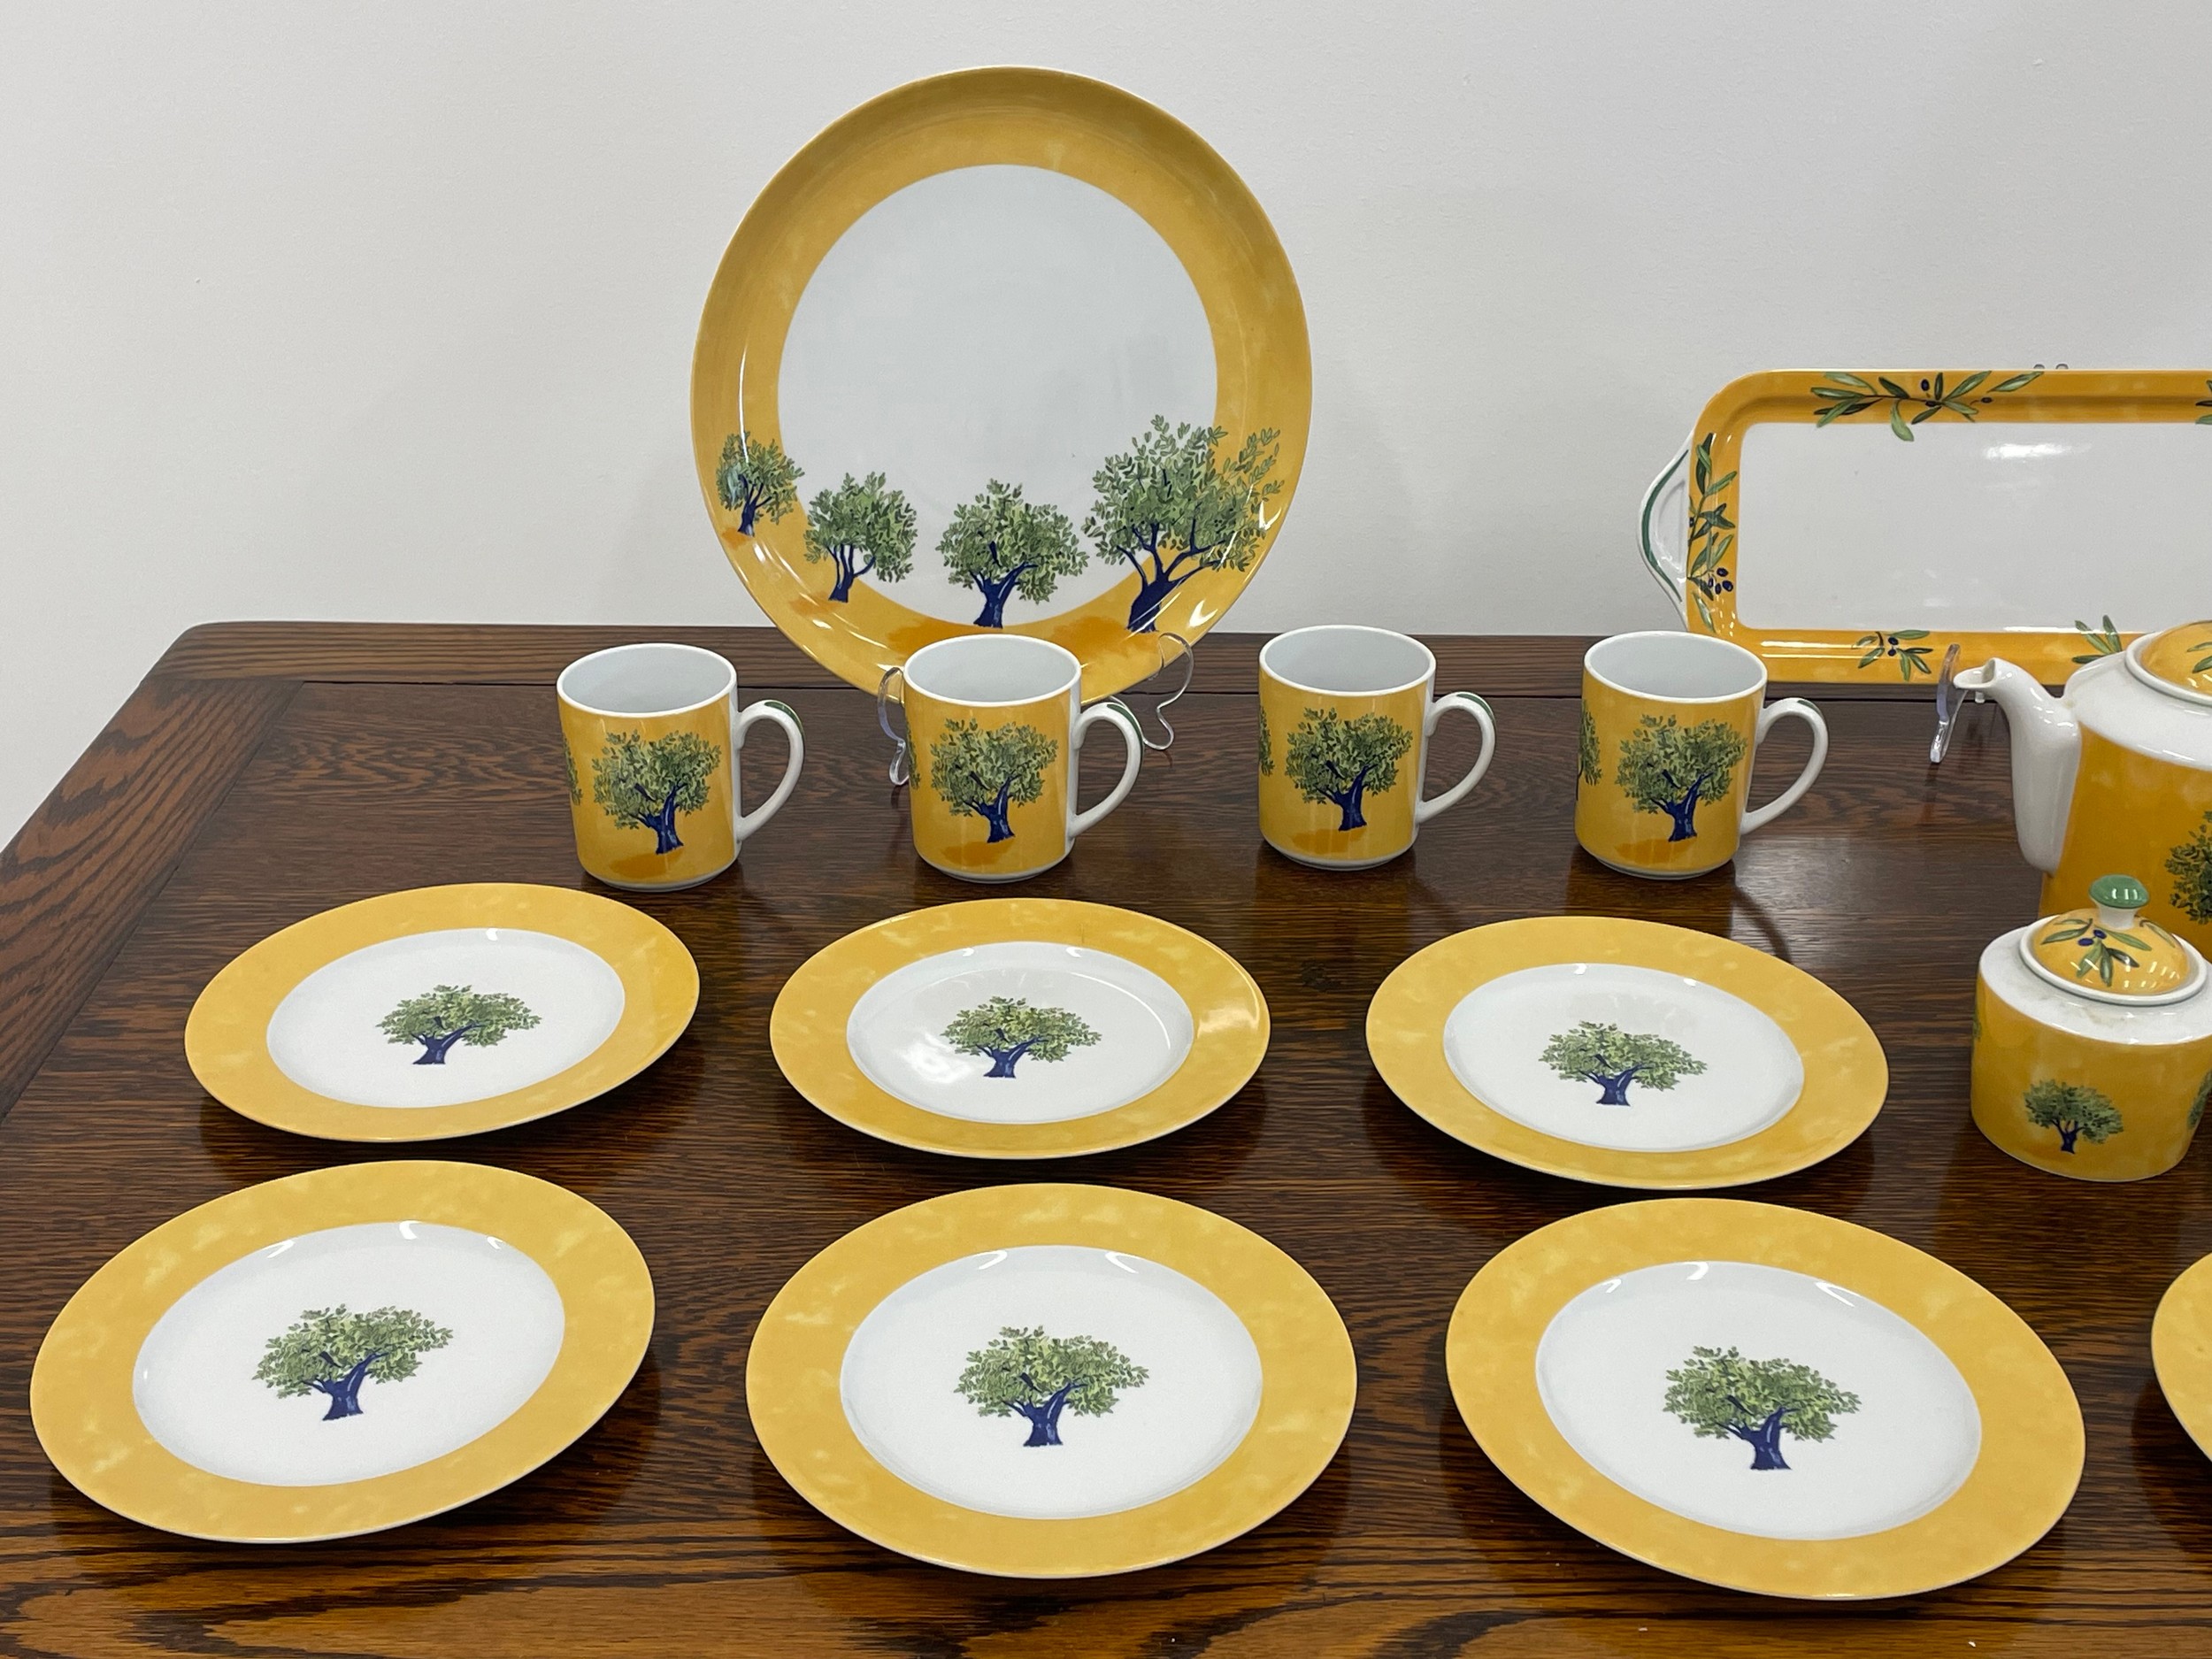 GUY DEGRENNE 'OULIVEIRO' EIGHT PLACE TEA SERVICE, including eight cups and saucers, eight mugs, - Image 8 of 10